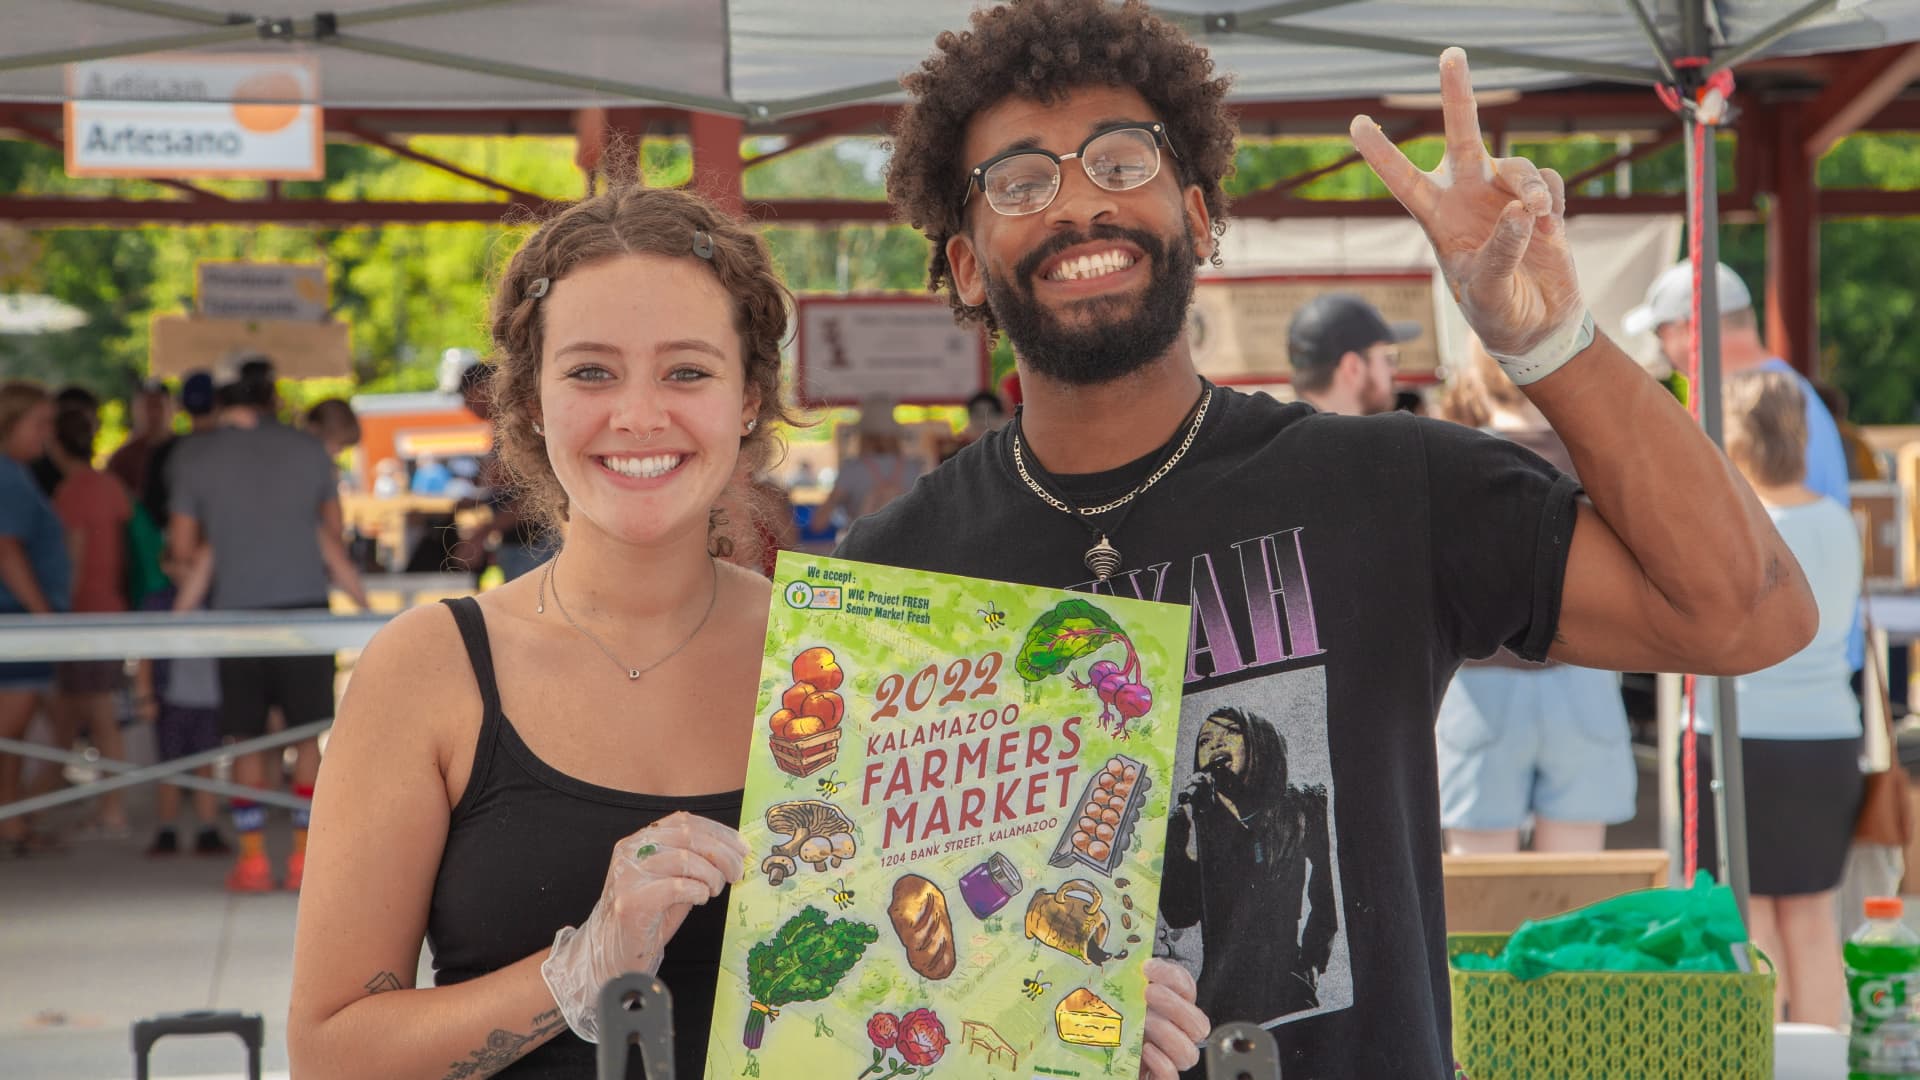 Nina Martinez, 27, and Derick Waters, 28, run Dirty Vegan, a plant-based comfort food stand, in Kalamazoo, Mich., which has a surprisingly robust restaurant scene relative to its size.